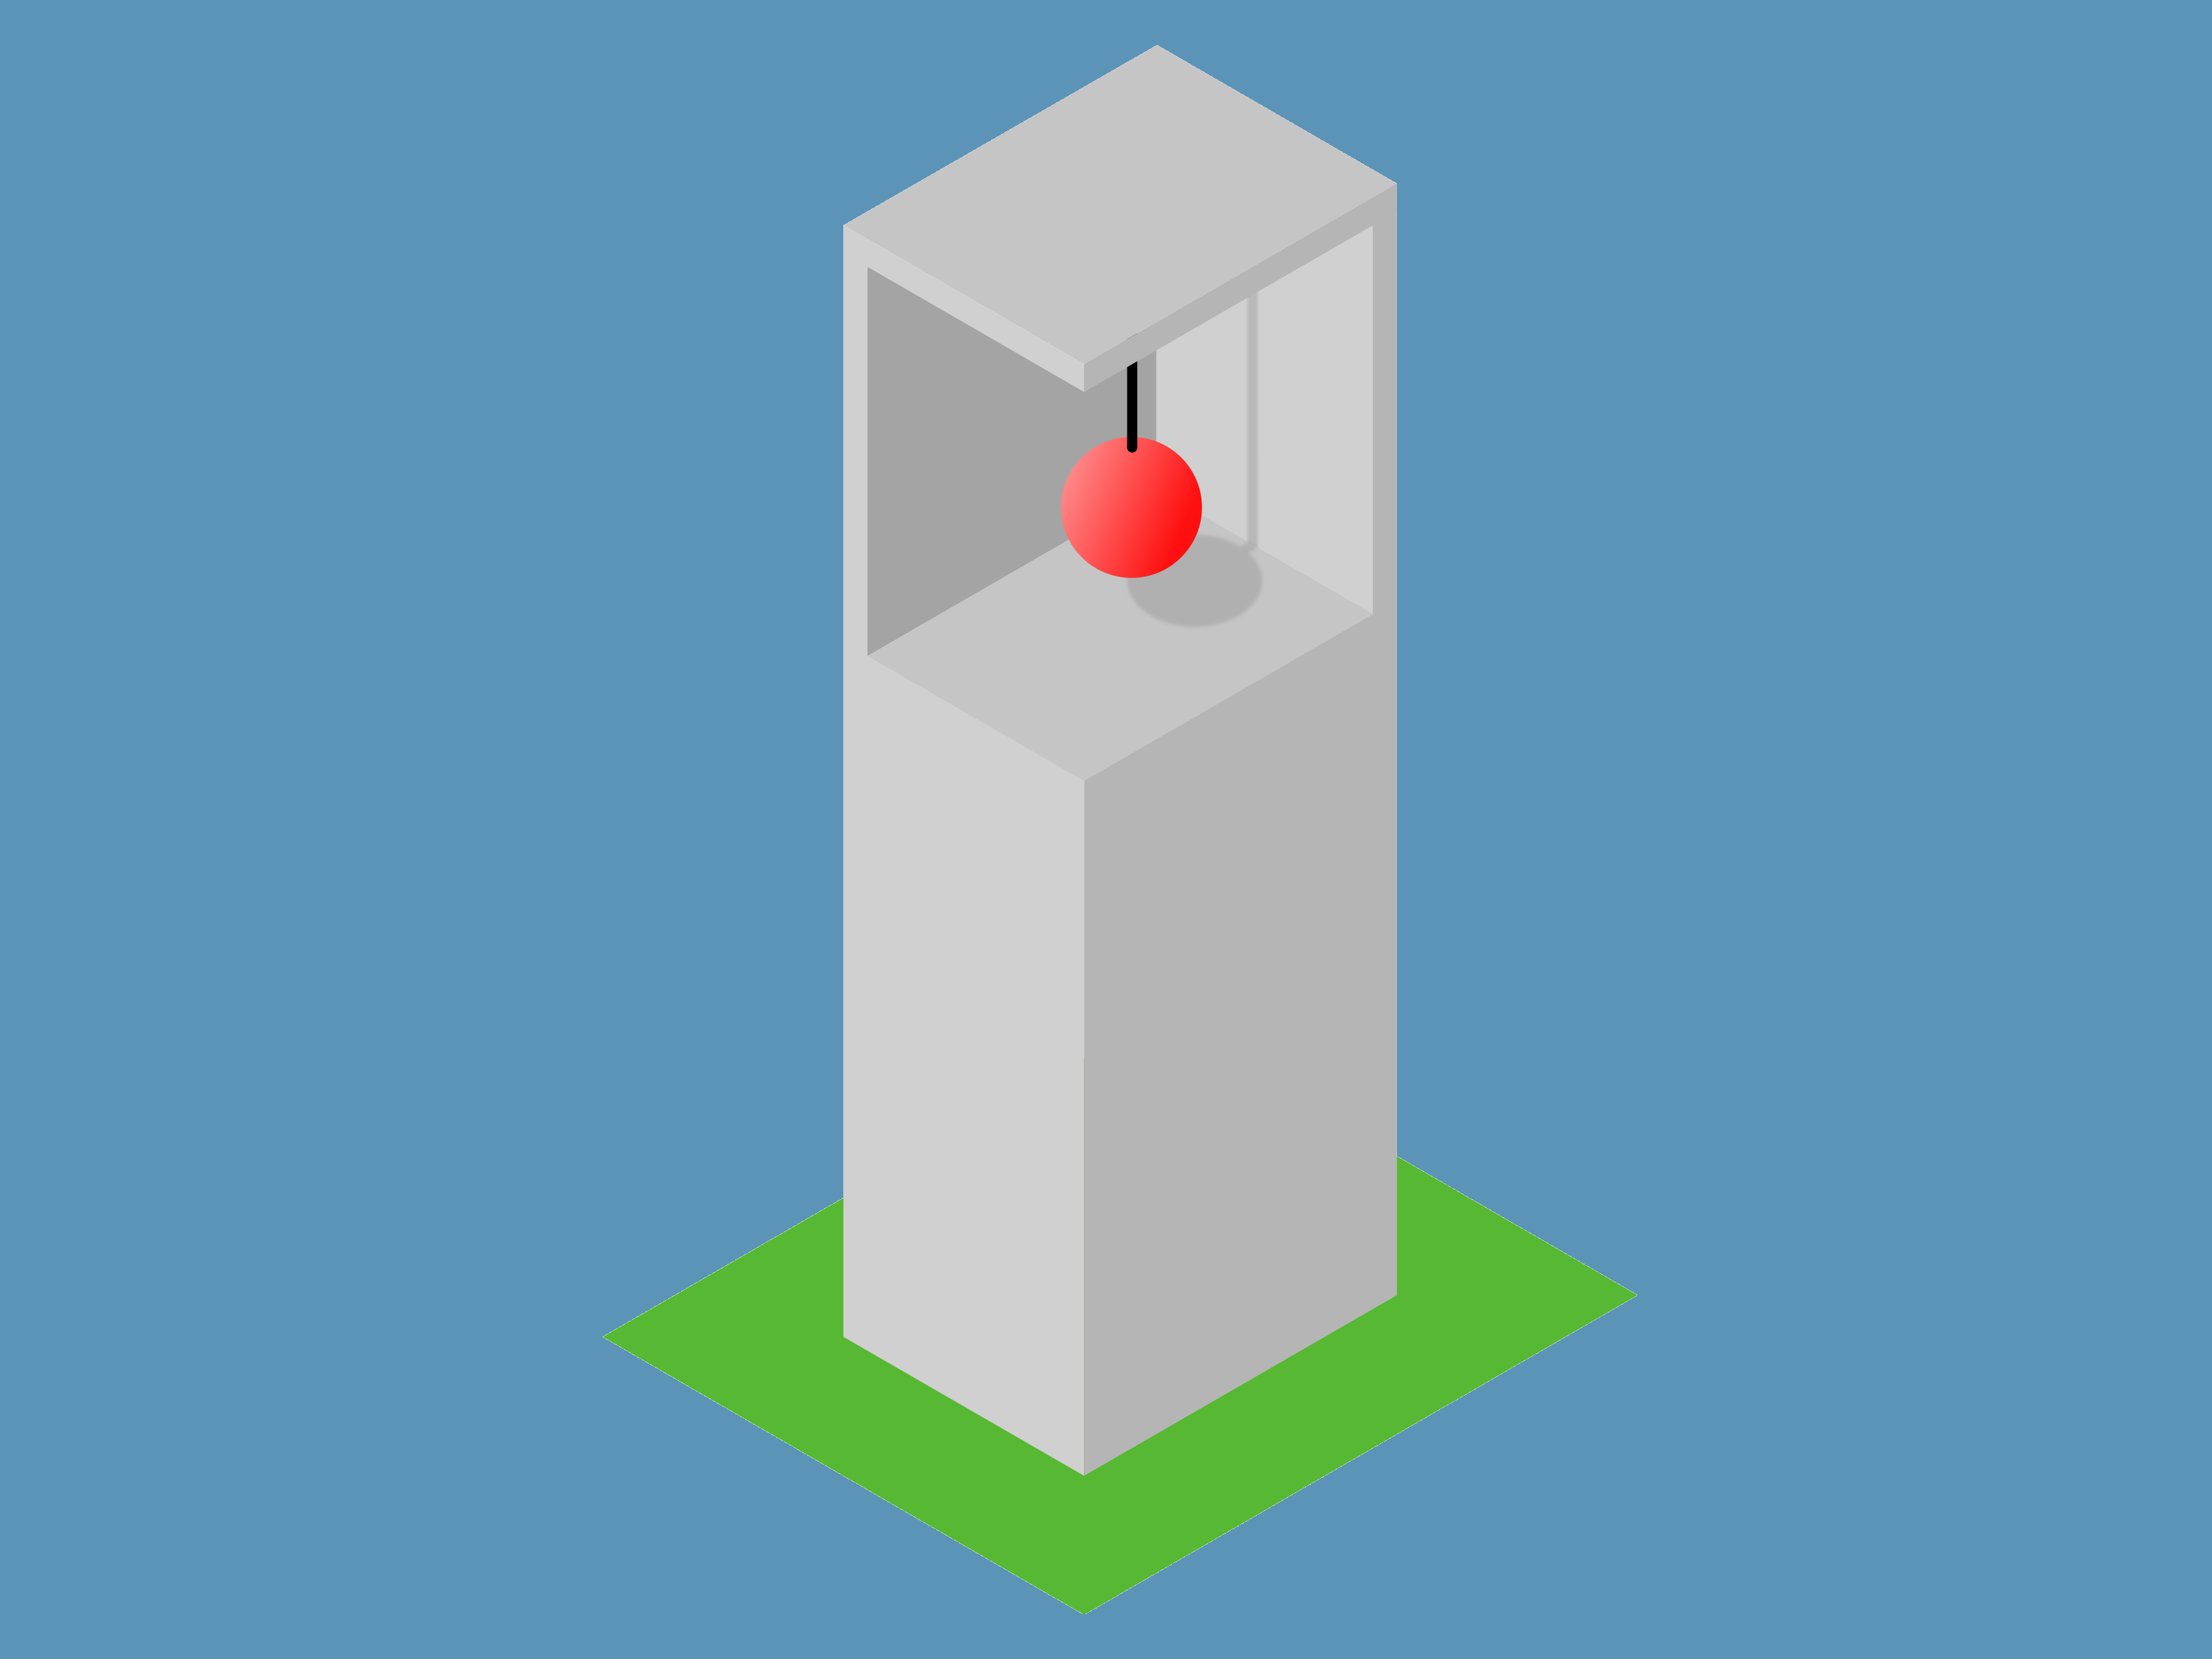 Simplified example of a TMD: A pendulum in a tall building can counteract swaying vibrations.